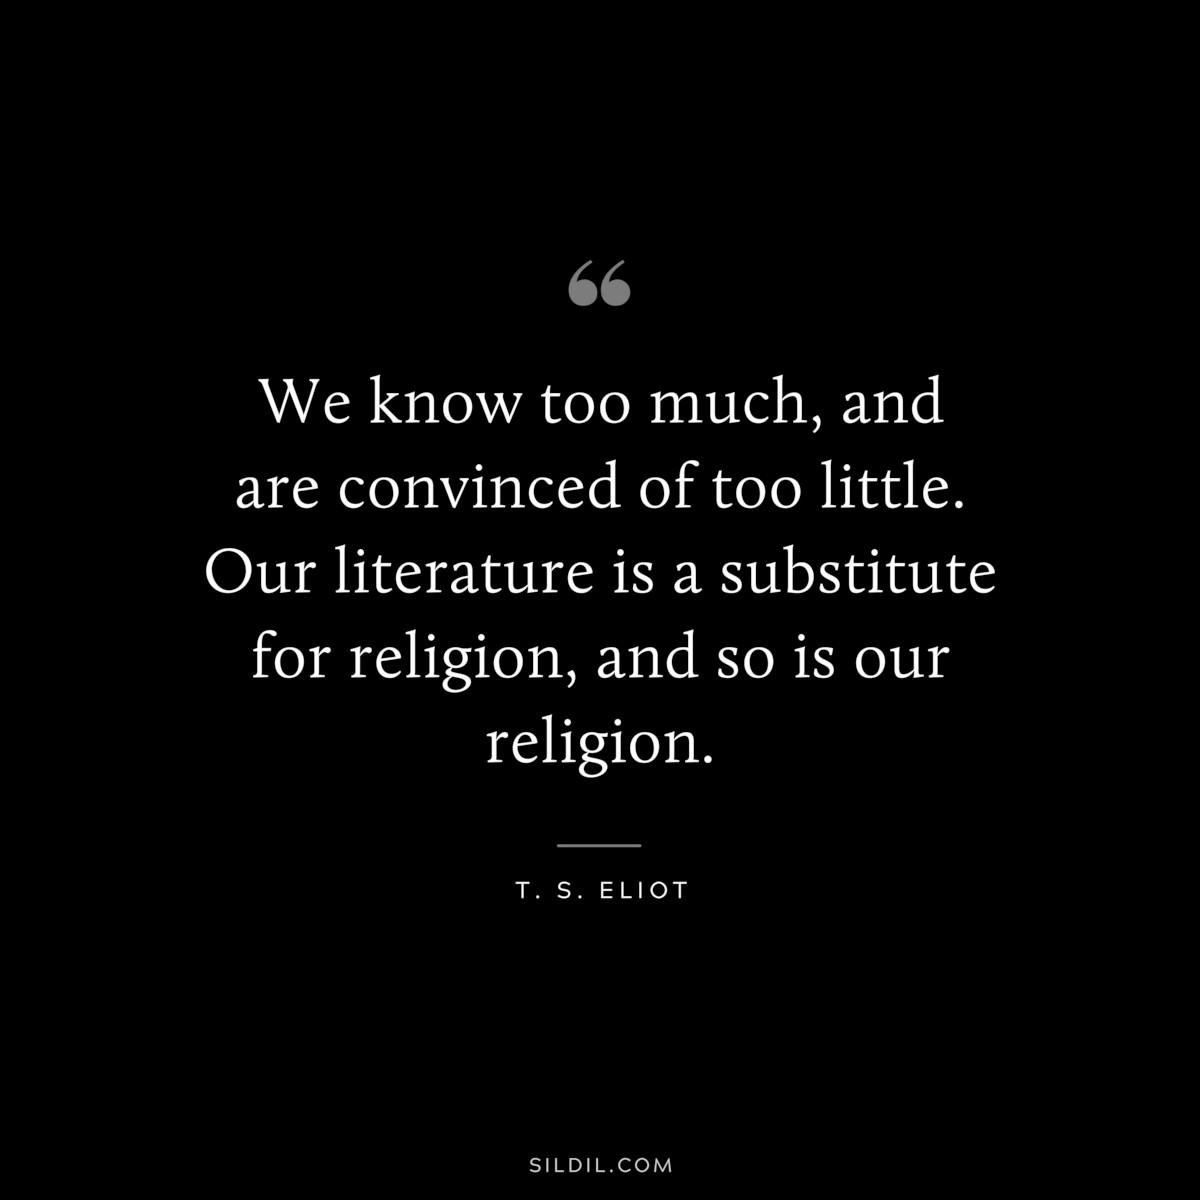 We know too much, and are convinced of too little. Our literature is a substitute for religion, and so is our religion. ― T. S. Eliot